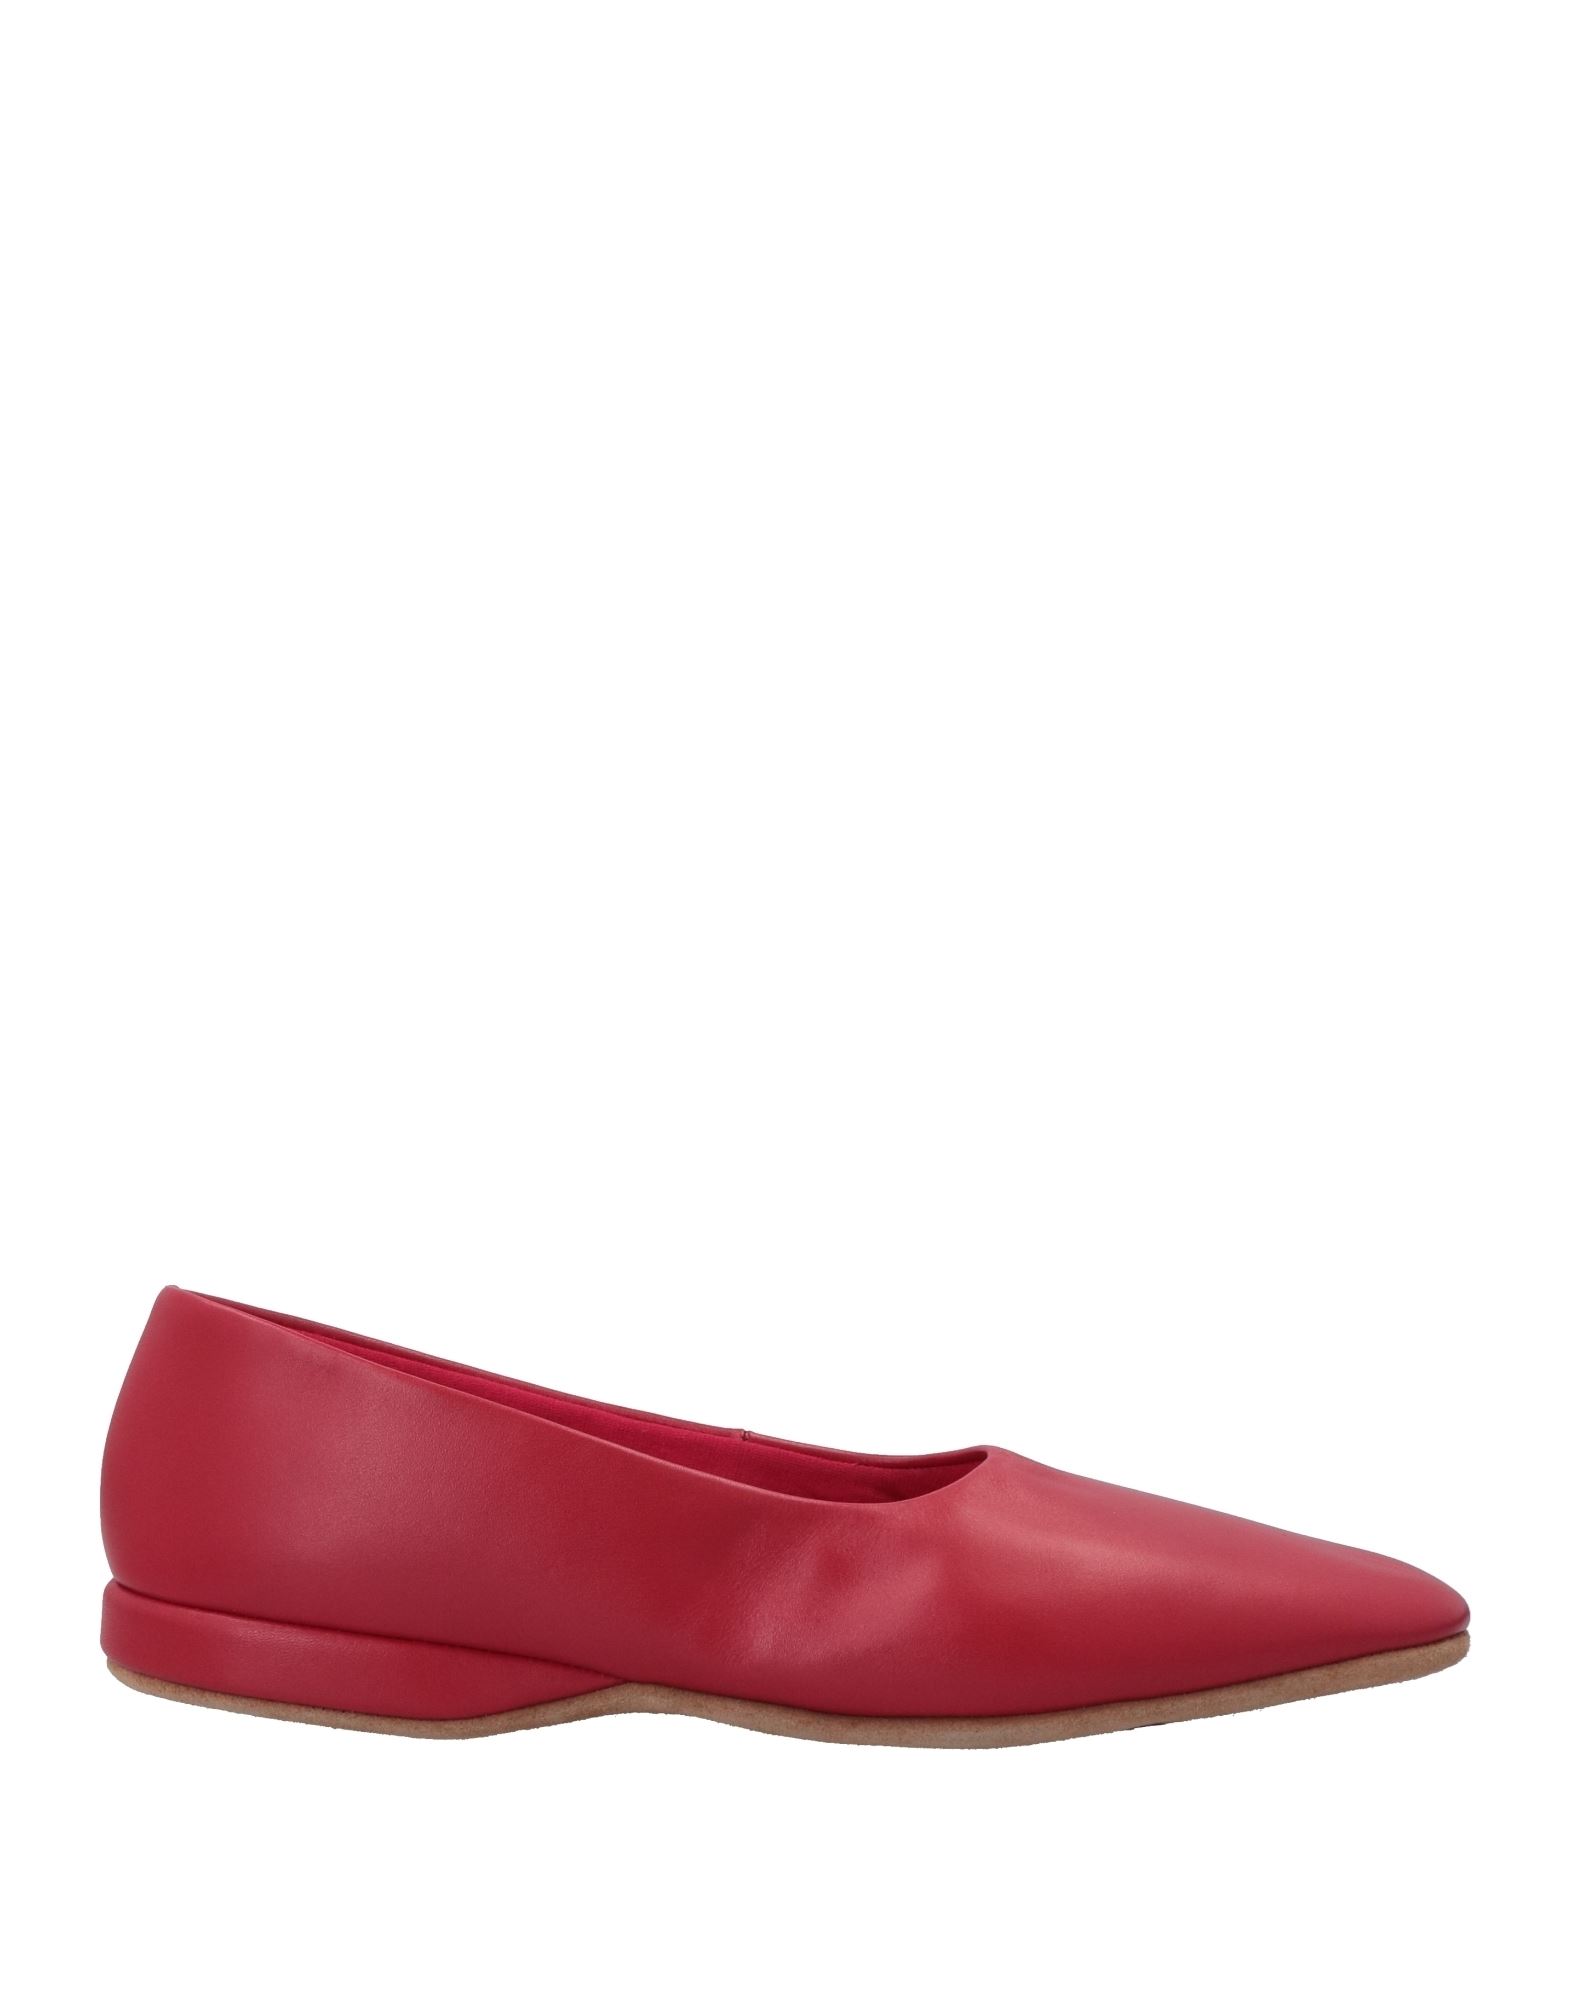 Church's Woman Ballet Flats Red Size 6 Soft Leather